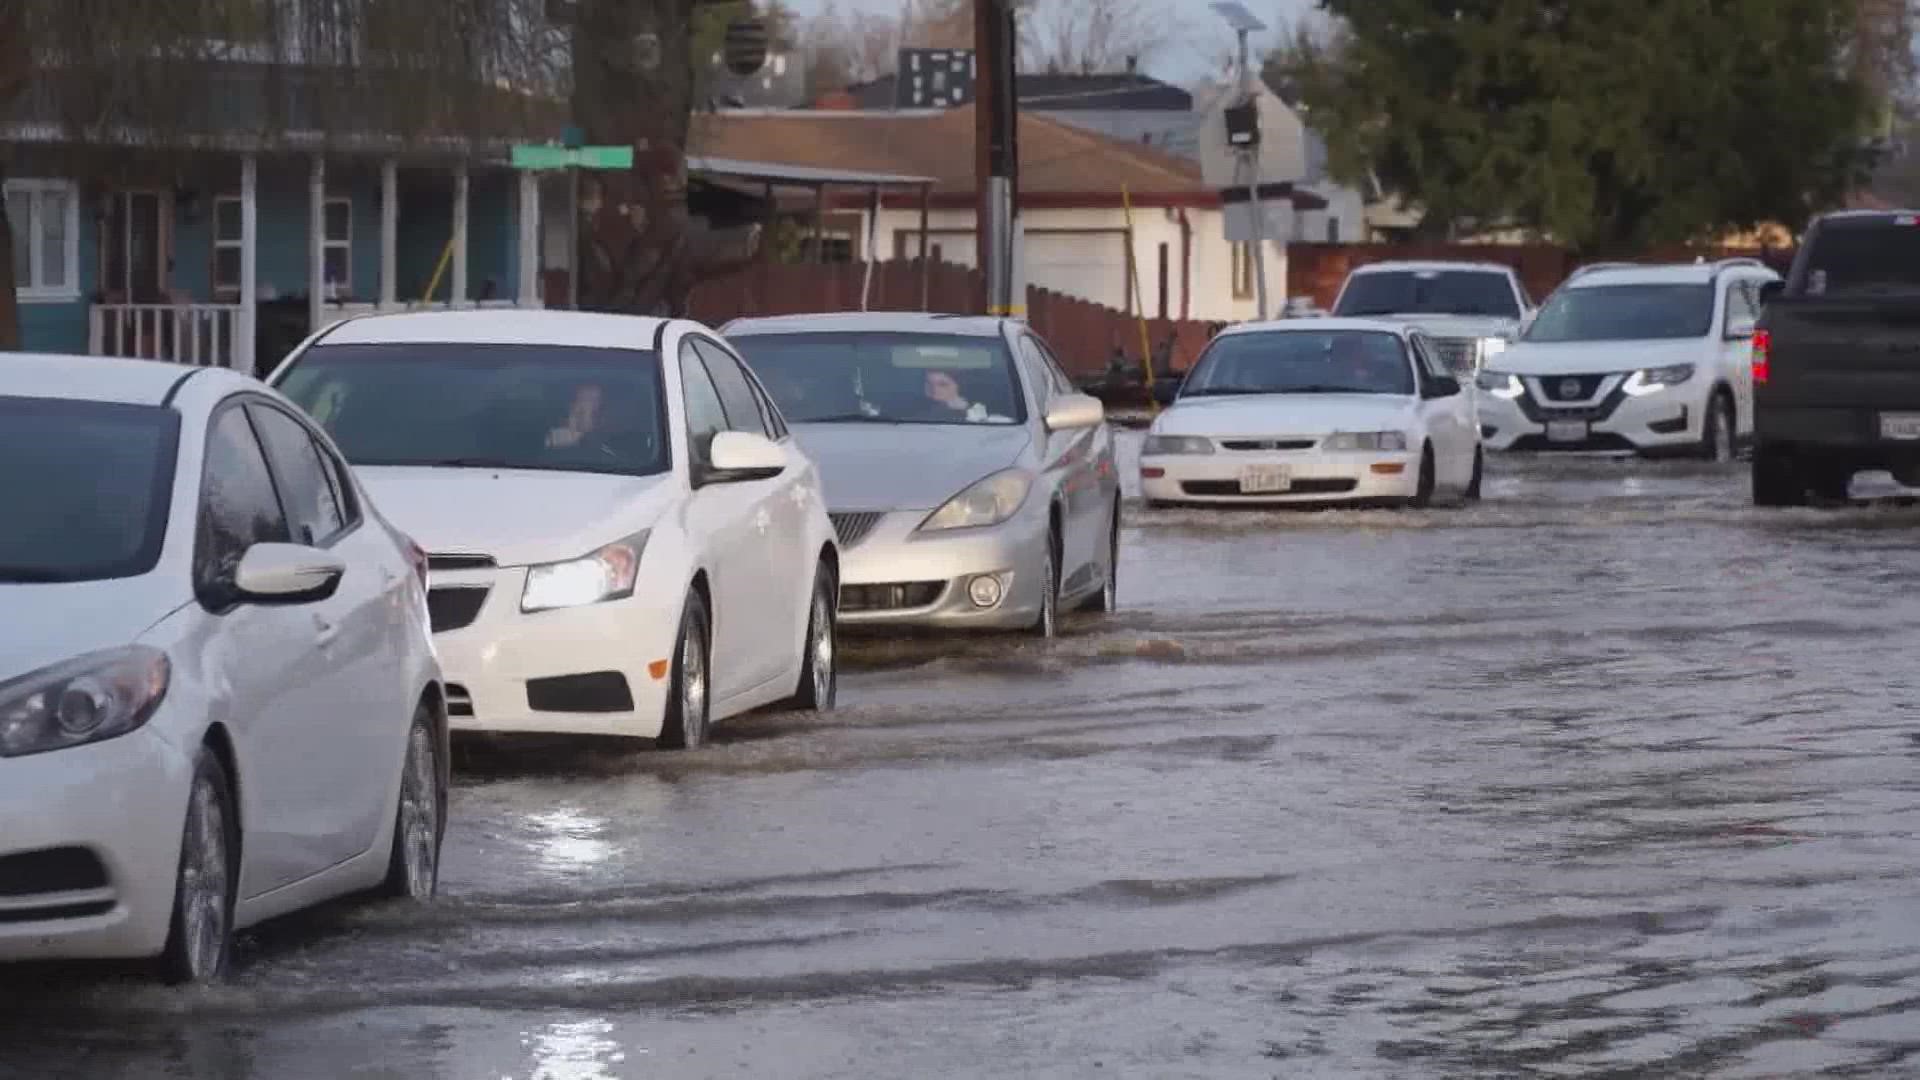 The latest storm delivered the heaviest rainfall to the Northern San Joaquin Valley resulting in flooding and evacuations.